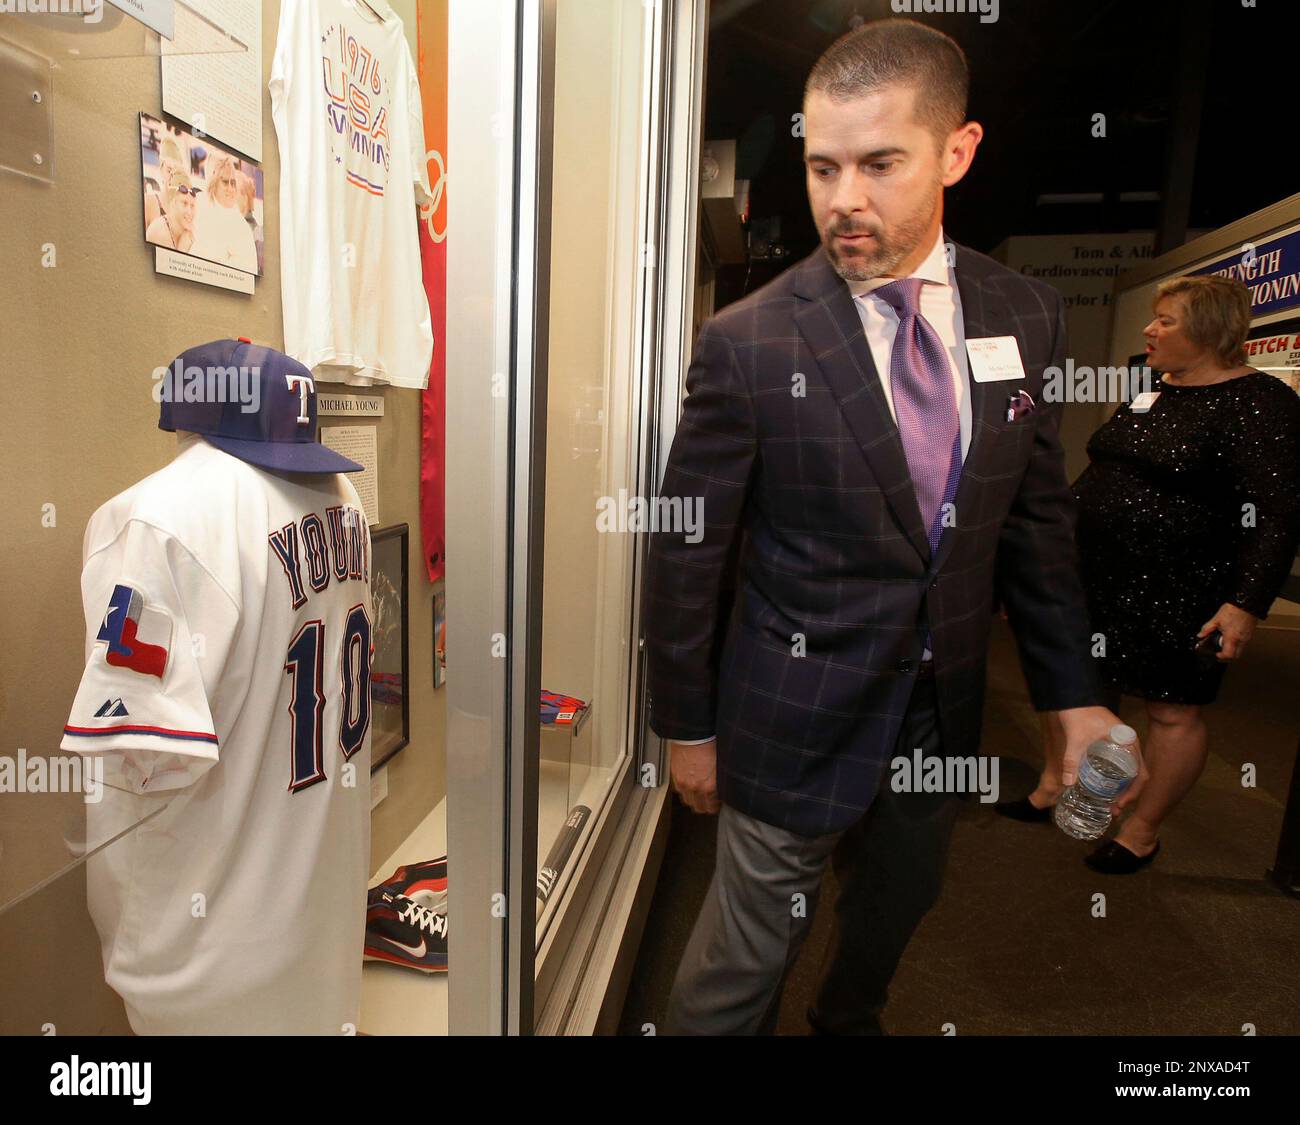 Former baseball player Michael Young looks over a display case